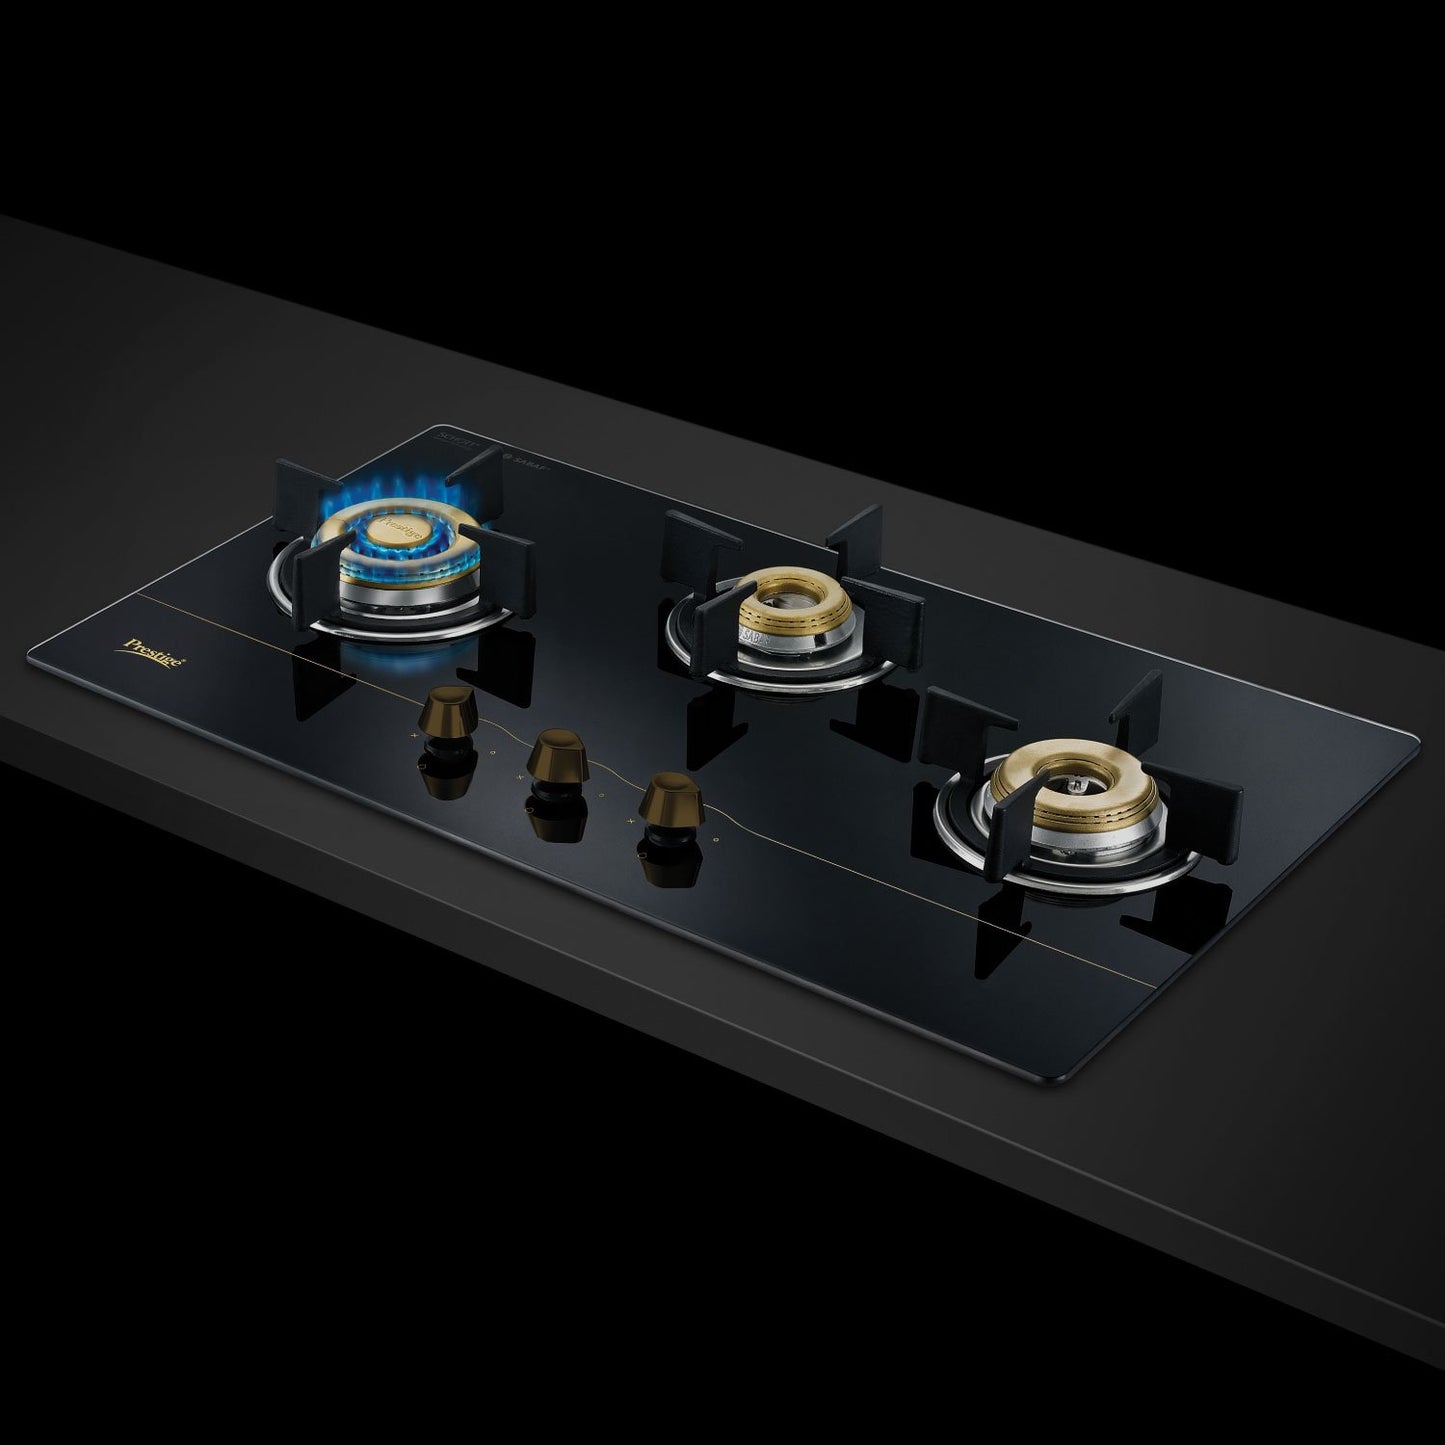 Prestige Gold Hobtop PHTG 03 AI Schott Glass Top Hob Gas Stove with One-Touch Advanced Auto-Ignition, 3 Burner